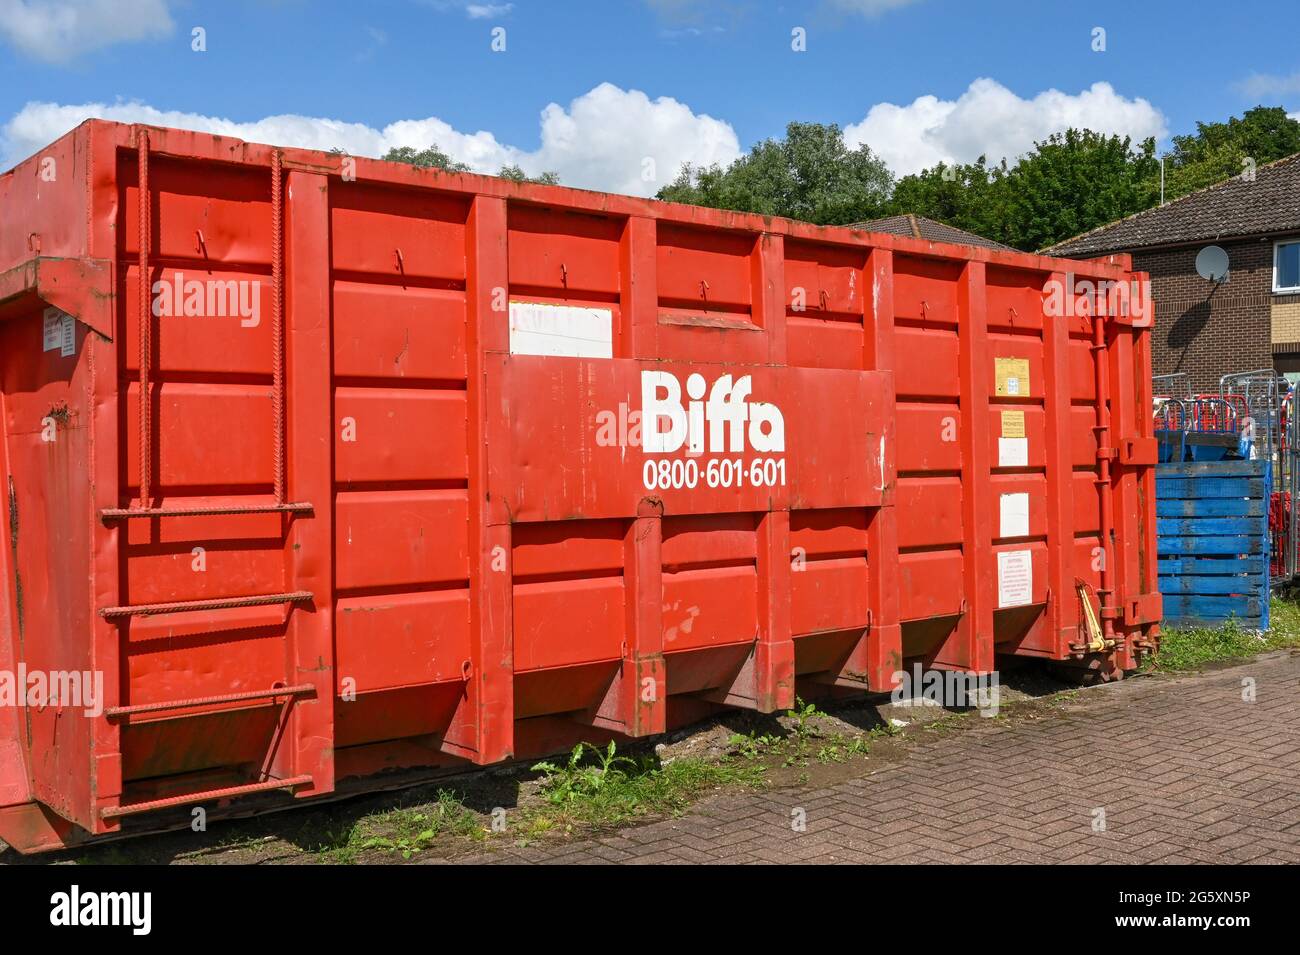 Swindon, England - June 2021: Large industrial waste container operated by the Biffa waste disposal company. Stock Photo